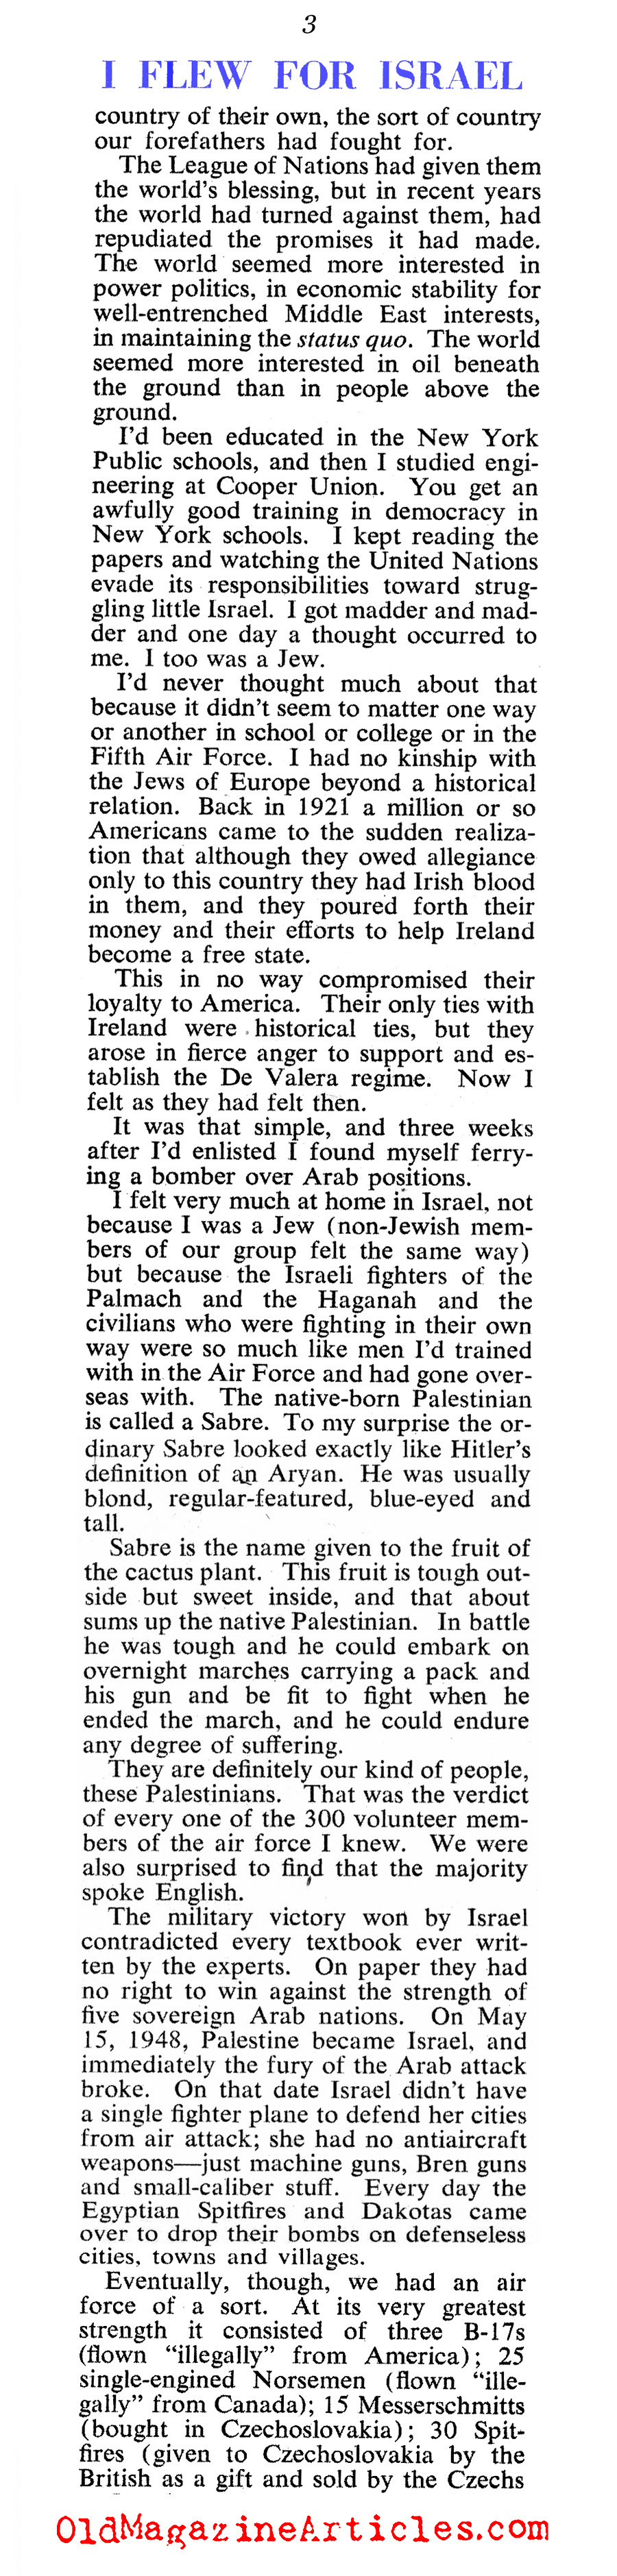 ''I Flew for Israel'' (Collier's Magazine, 1949)